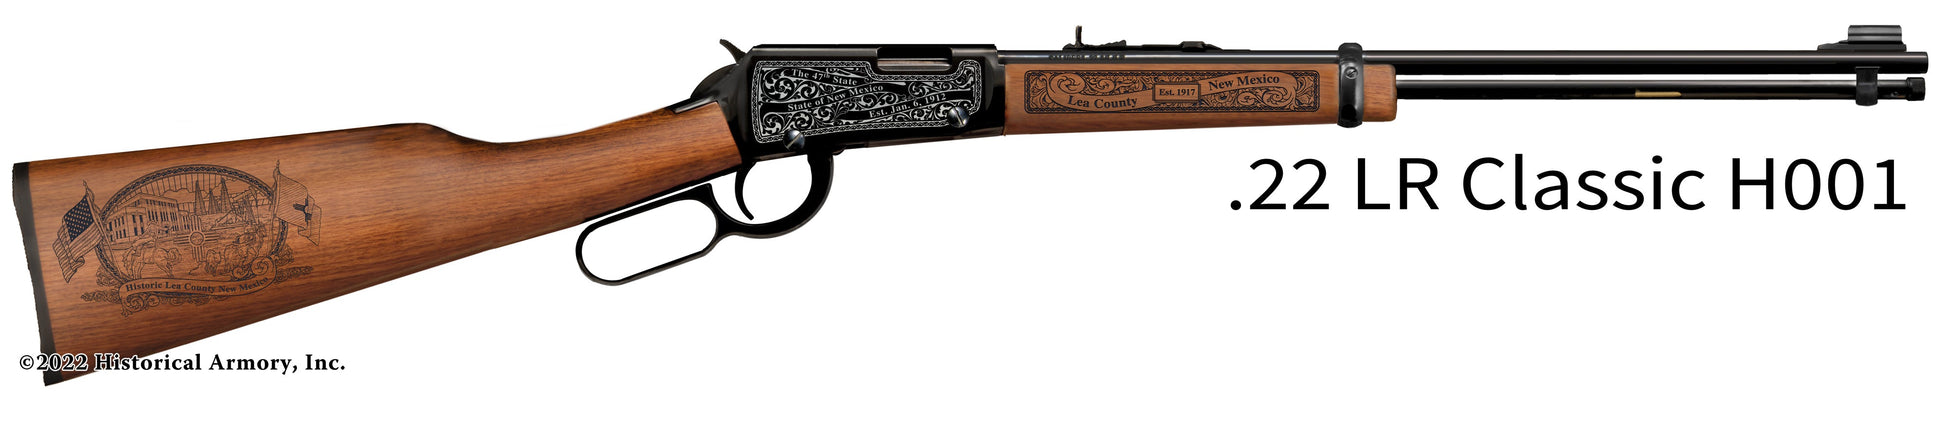 Lea County New Mexico Engraved Henry H001 Rifle